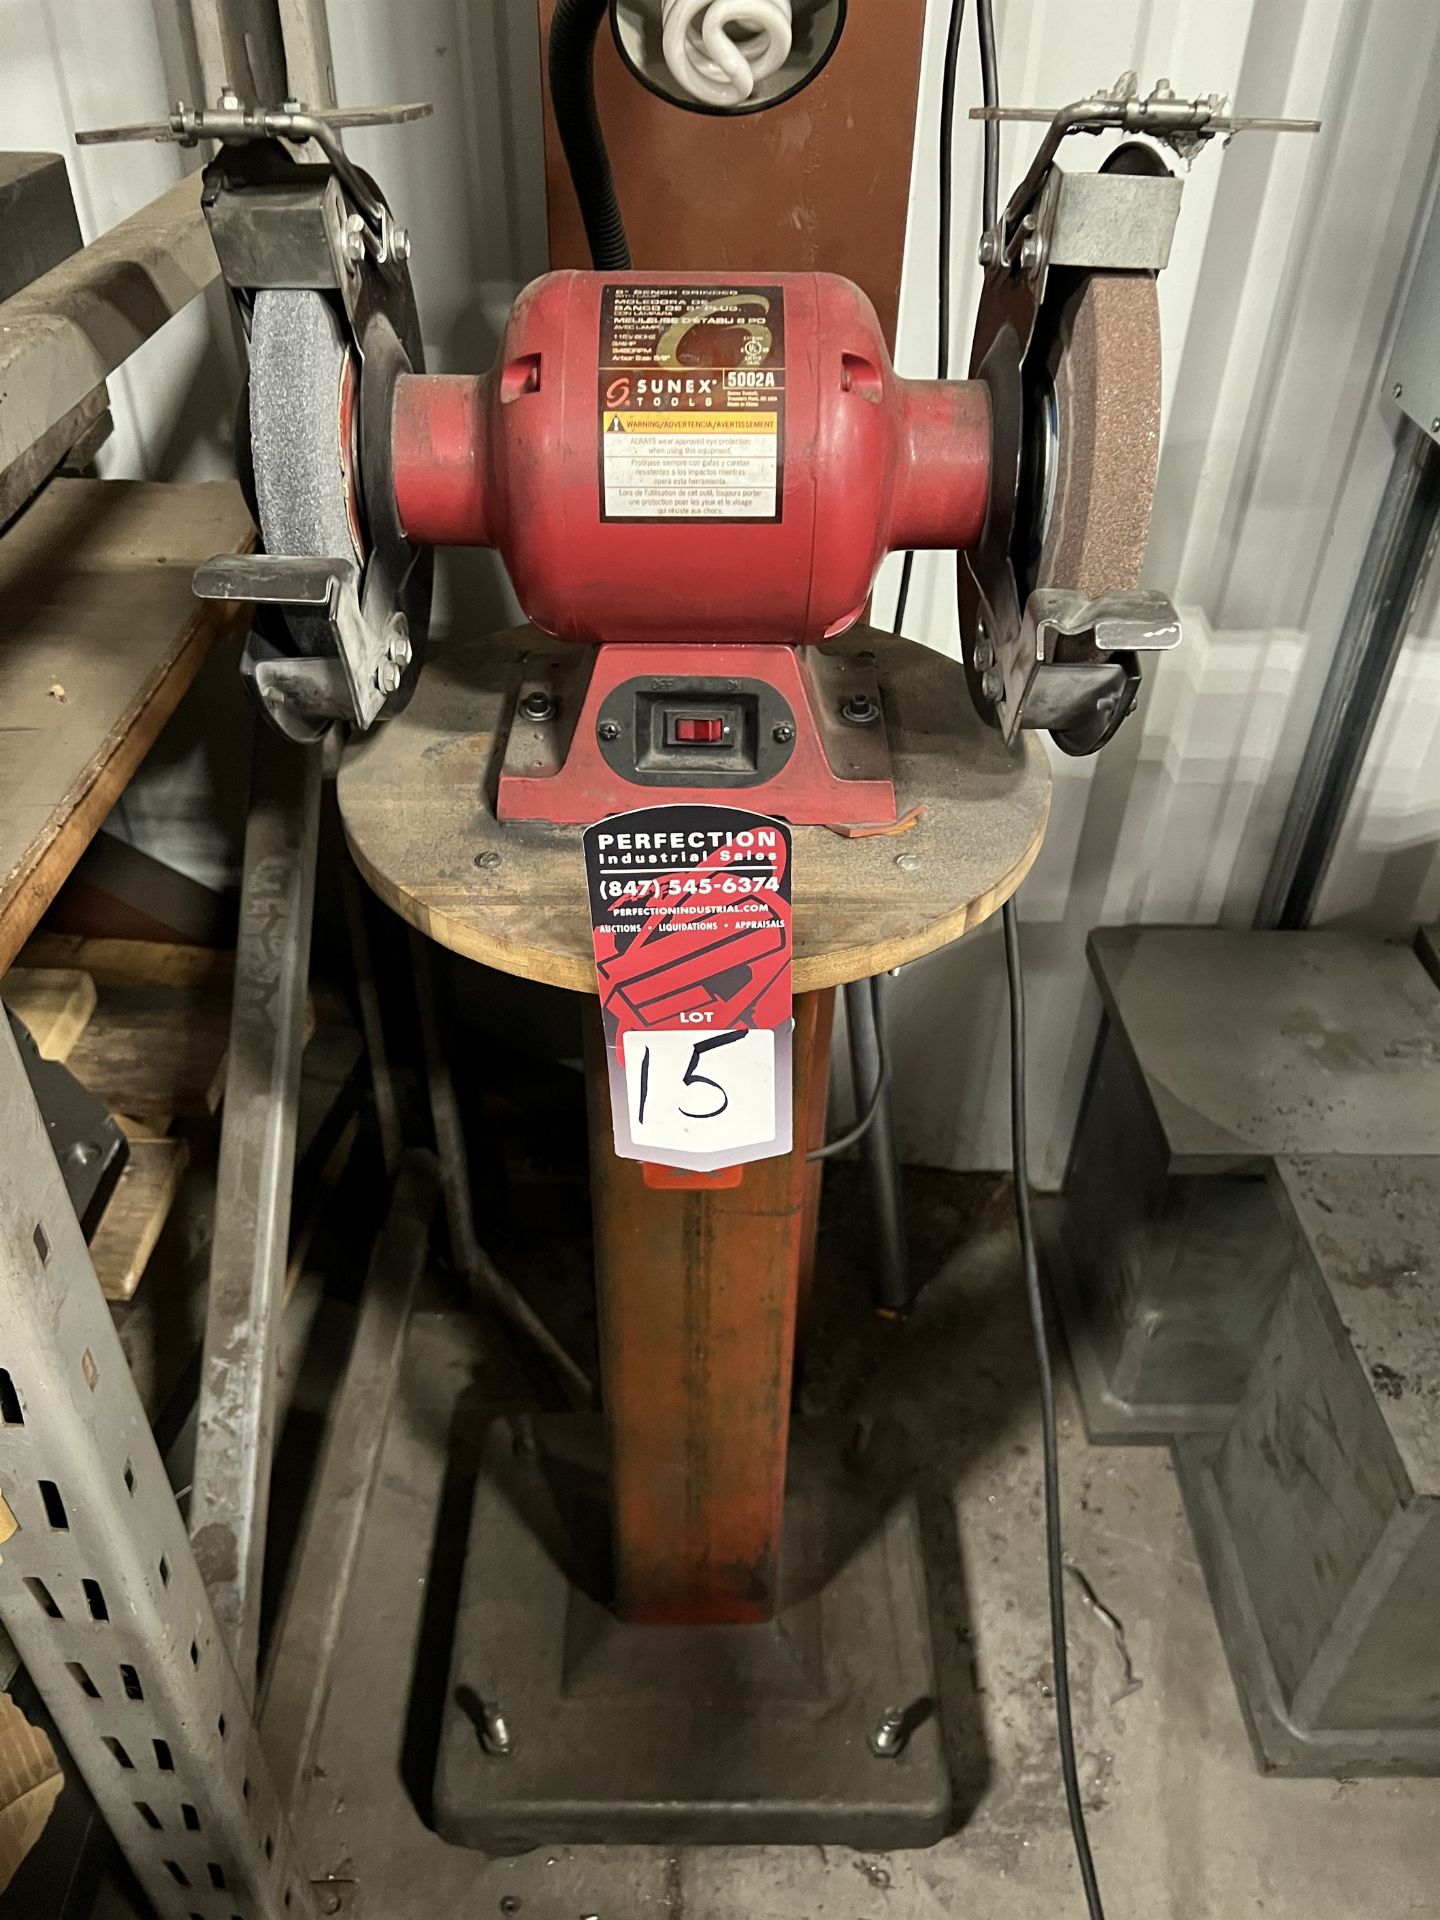 SUNEX 5002A 8" Bench Grinder, 3/4 HP, 3450 RPM (This lot is located at 1935 W. Lusher Avenue, - Image 2 of 4